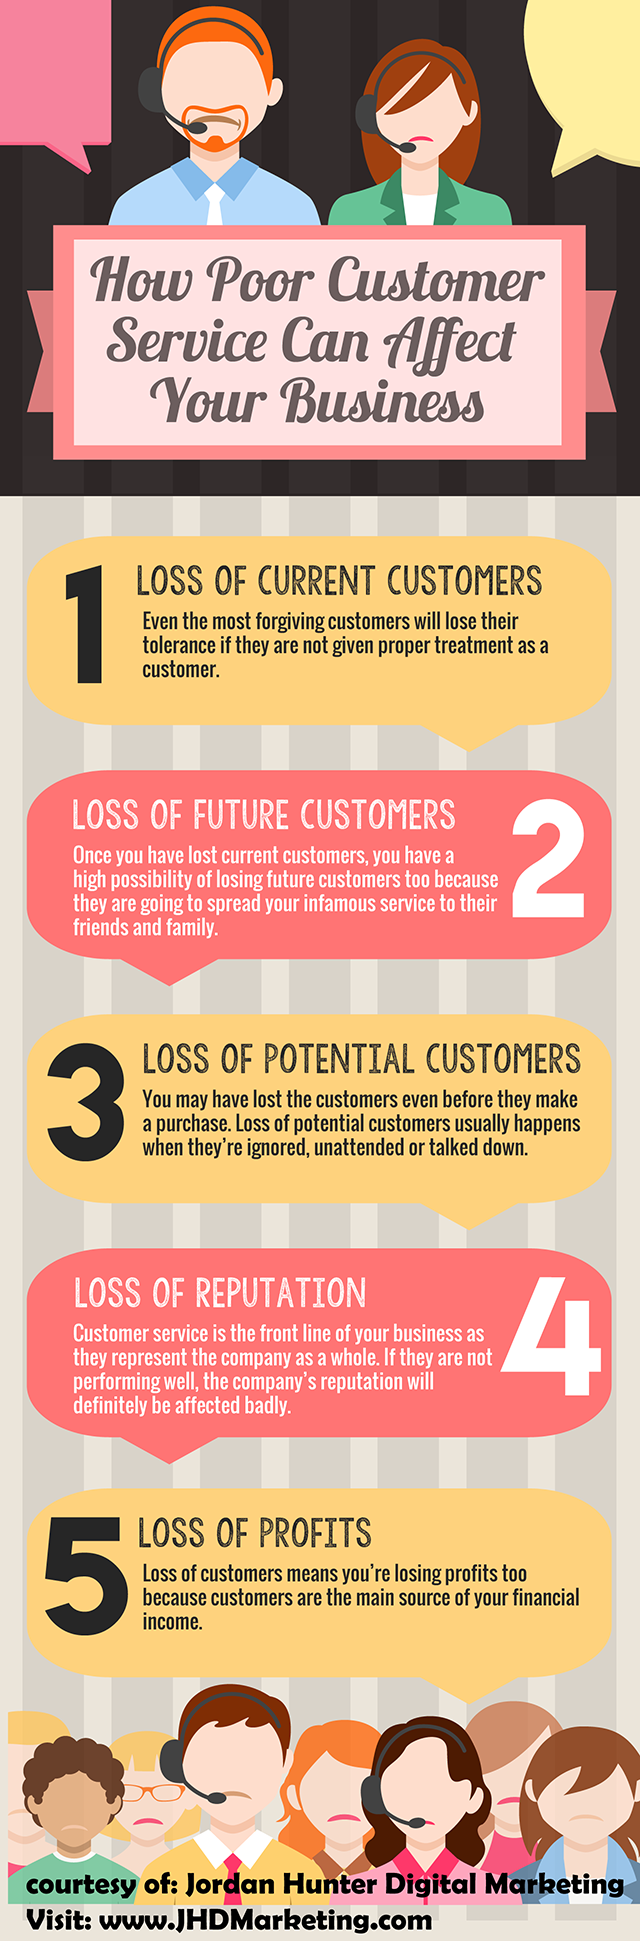 How Poor Customer Service Can Affect Your Business